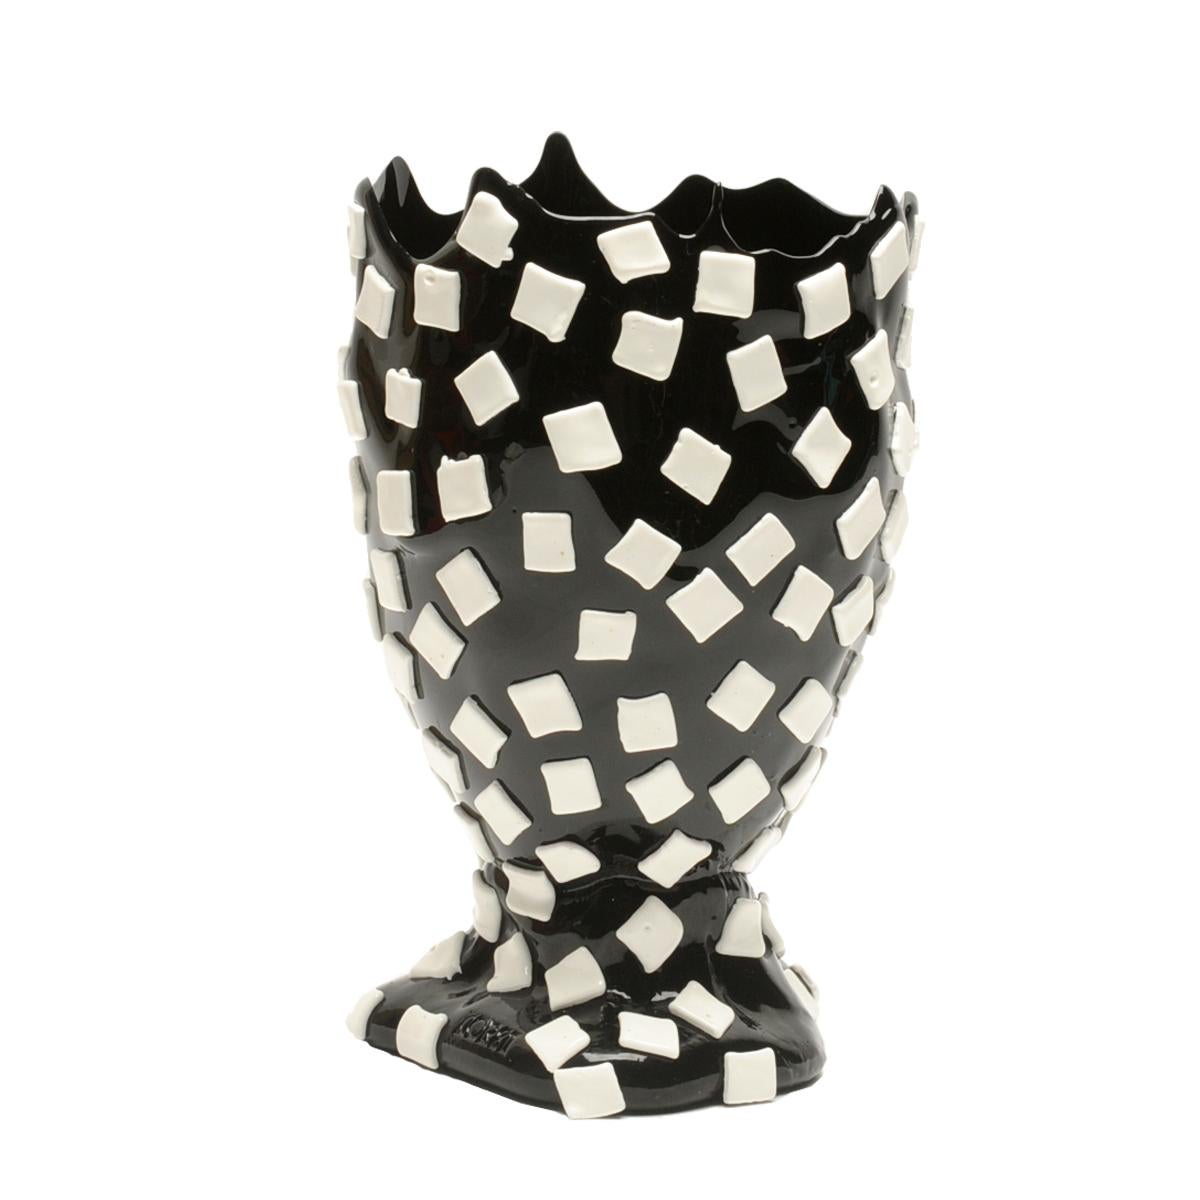 Arts and Crafts Contemporary Gaetano Pesce Rock M Vase Resin Black White For Sale